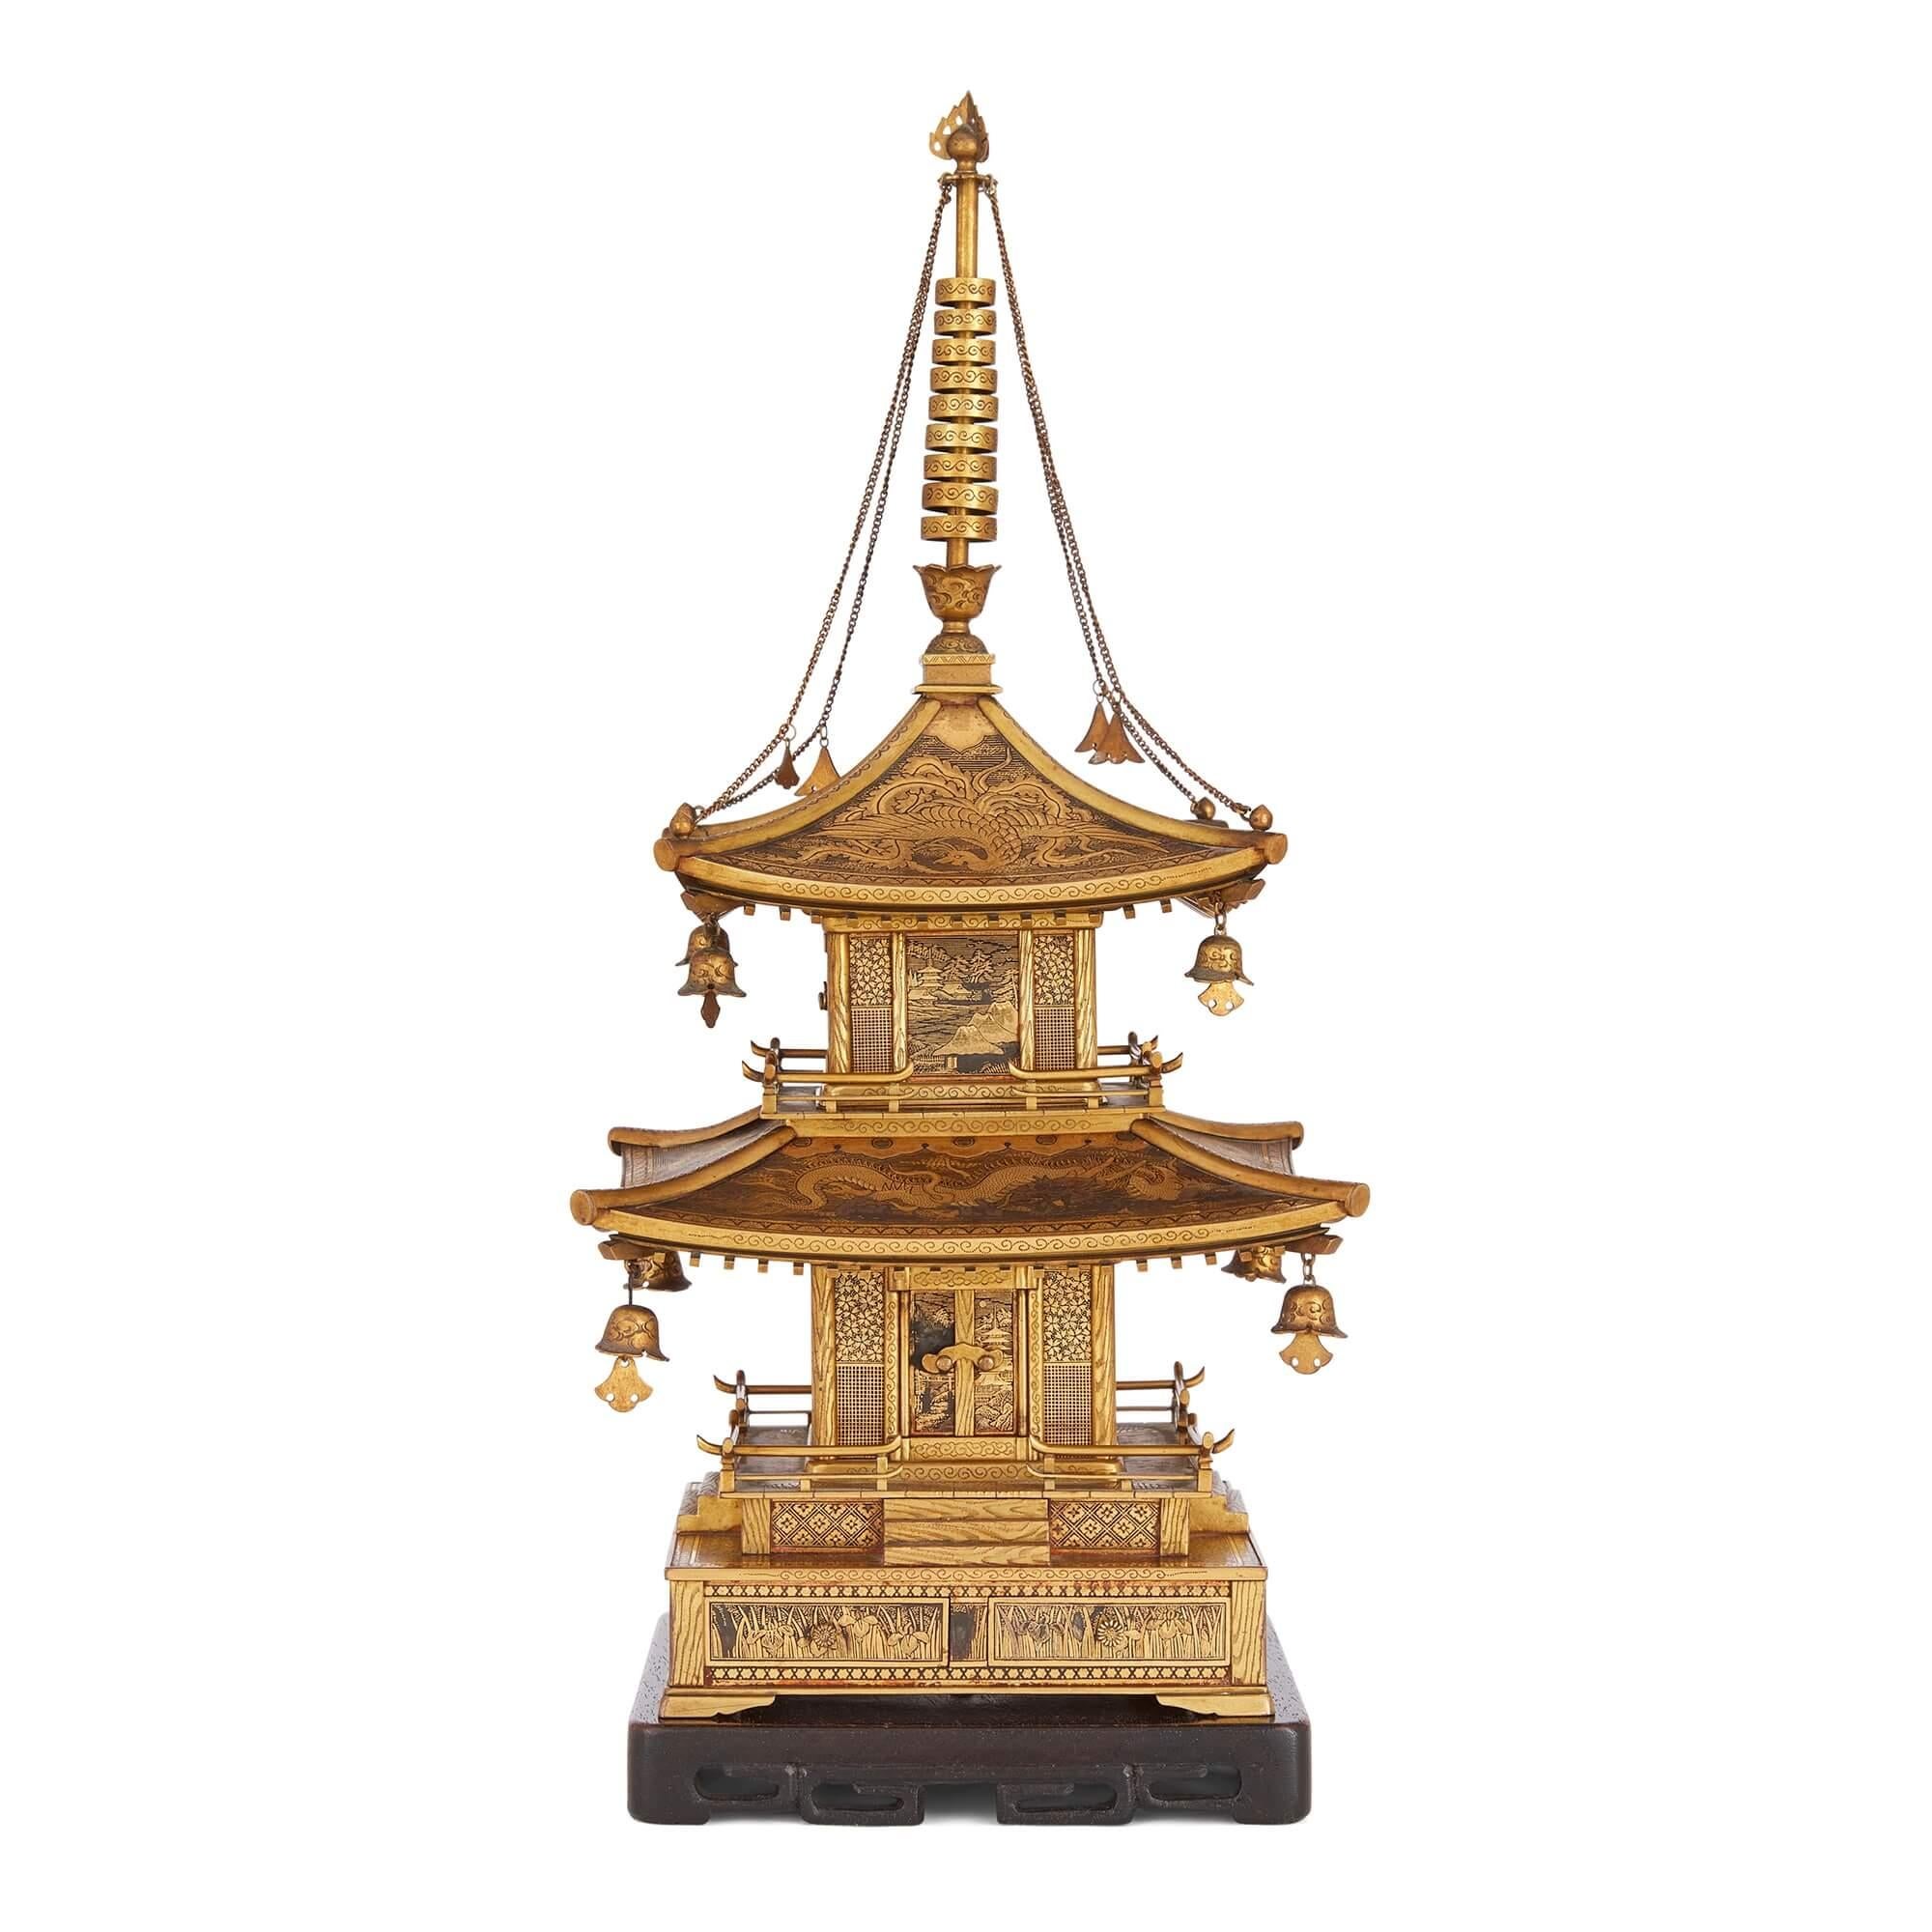 Japanese Meiji period Komai inlaid-iron pagoda model
Japanese, Late 19th Century 
Temple: Height 33cm, width 15cm, depth 15cm
Base: Height 2 cm, width 13.5cm, depth 13.5cm
Together: Height 35cm, width 15cm, depth 15cm

This outstanding and extremely